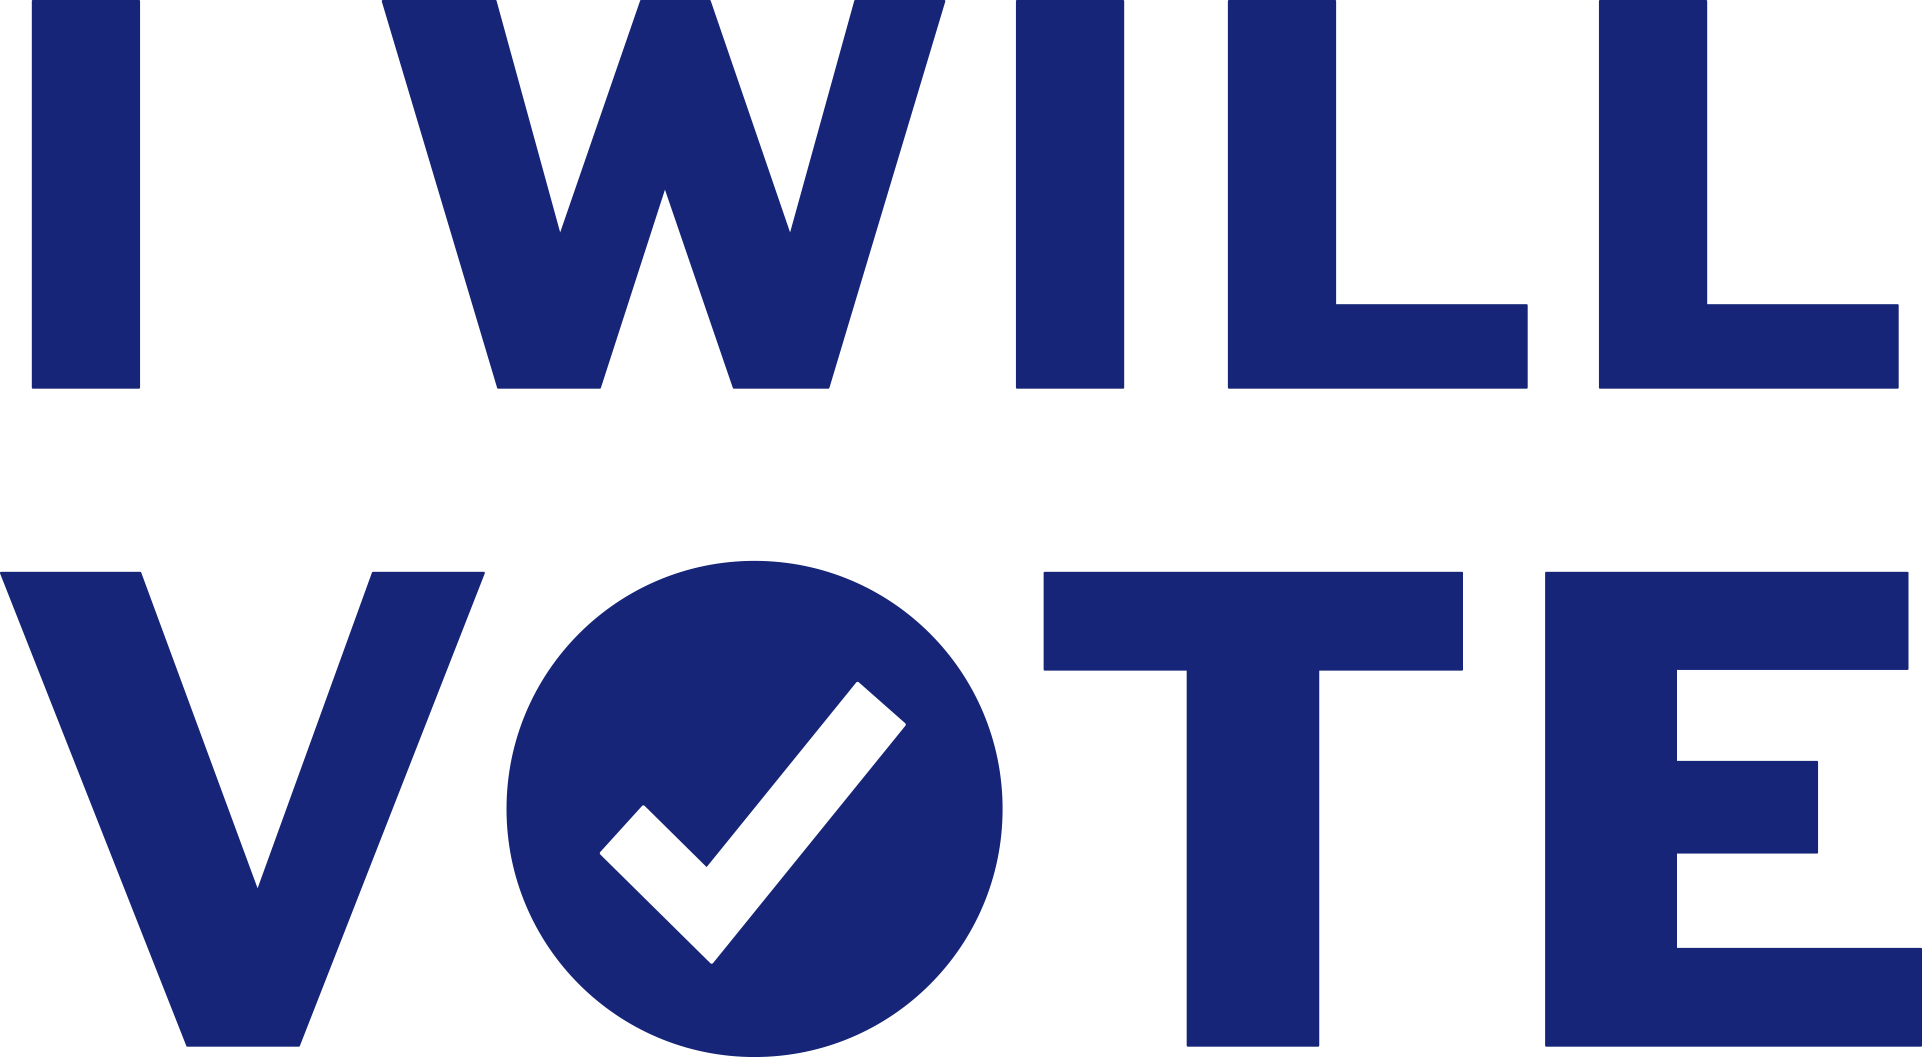 Your ZIP code and state: 84310, Utah. For information about your state's deadlines, visit IWillVote.com